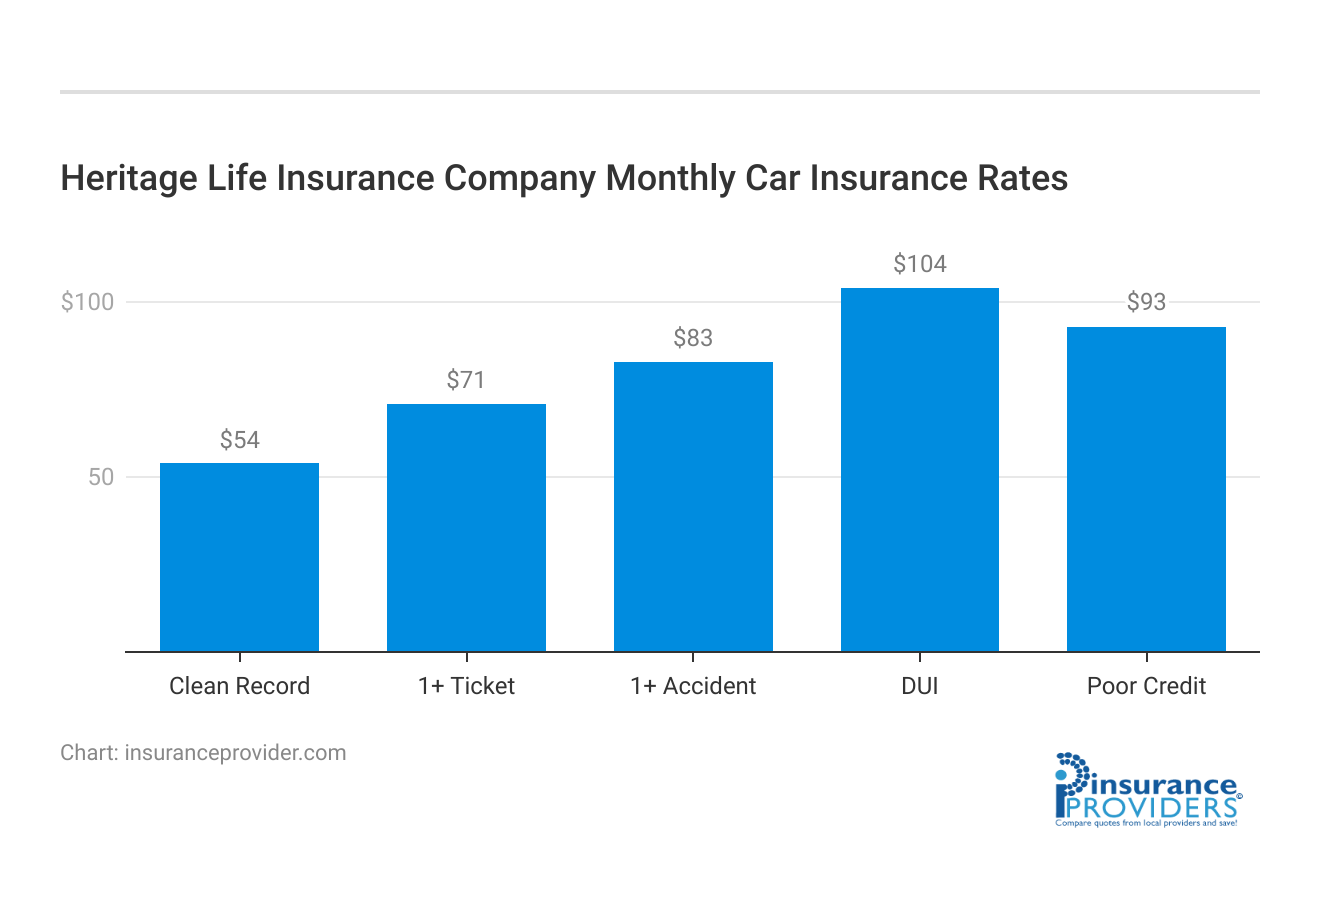 <h3>Heritage Life Insurance Company Monthly Car Insurance Rates</h3>